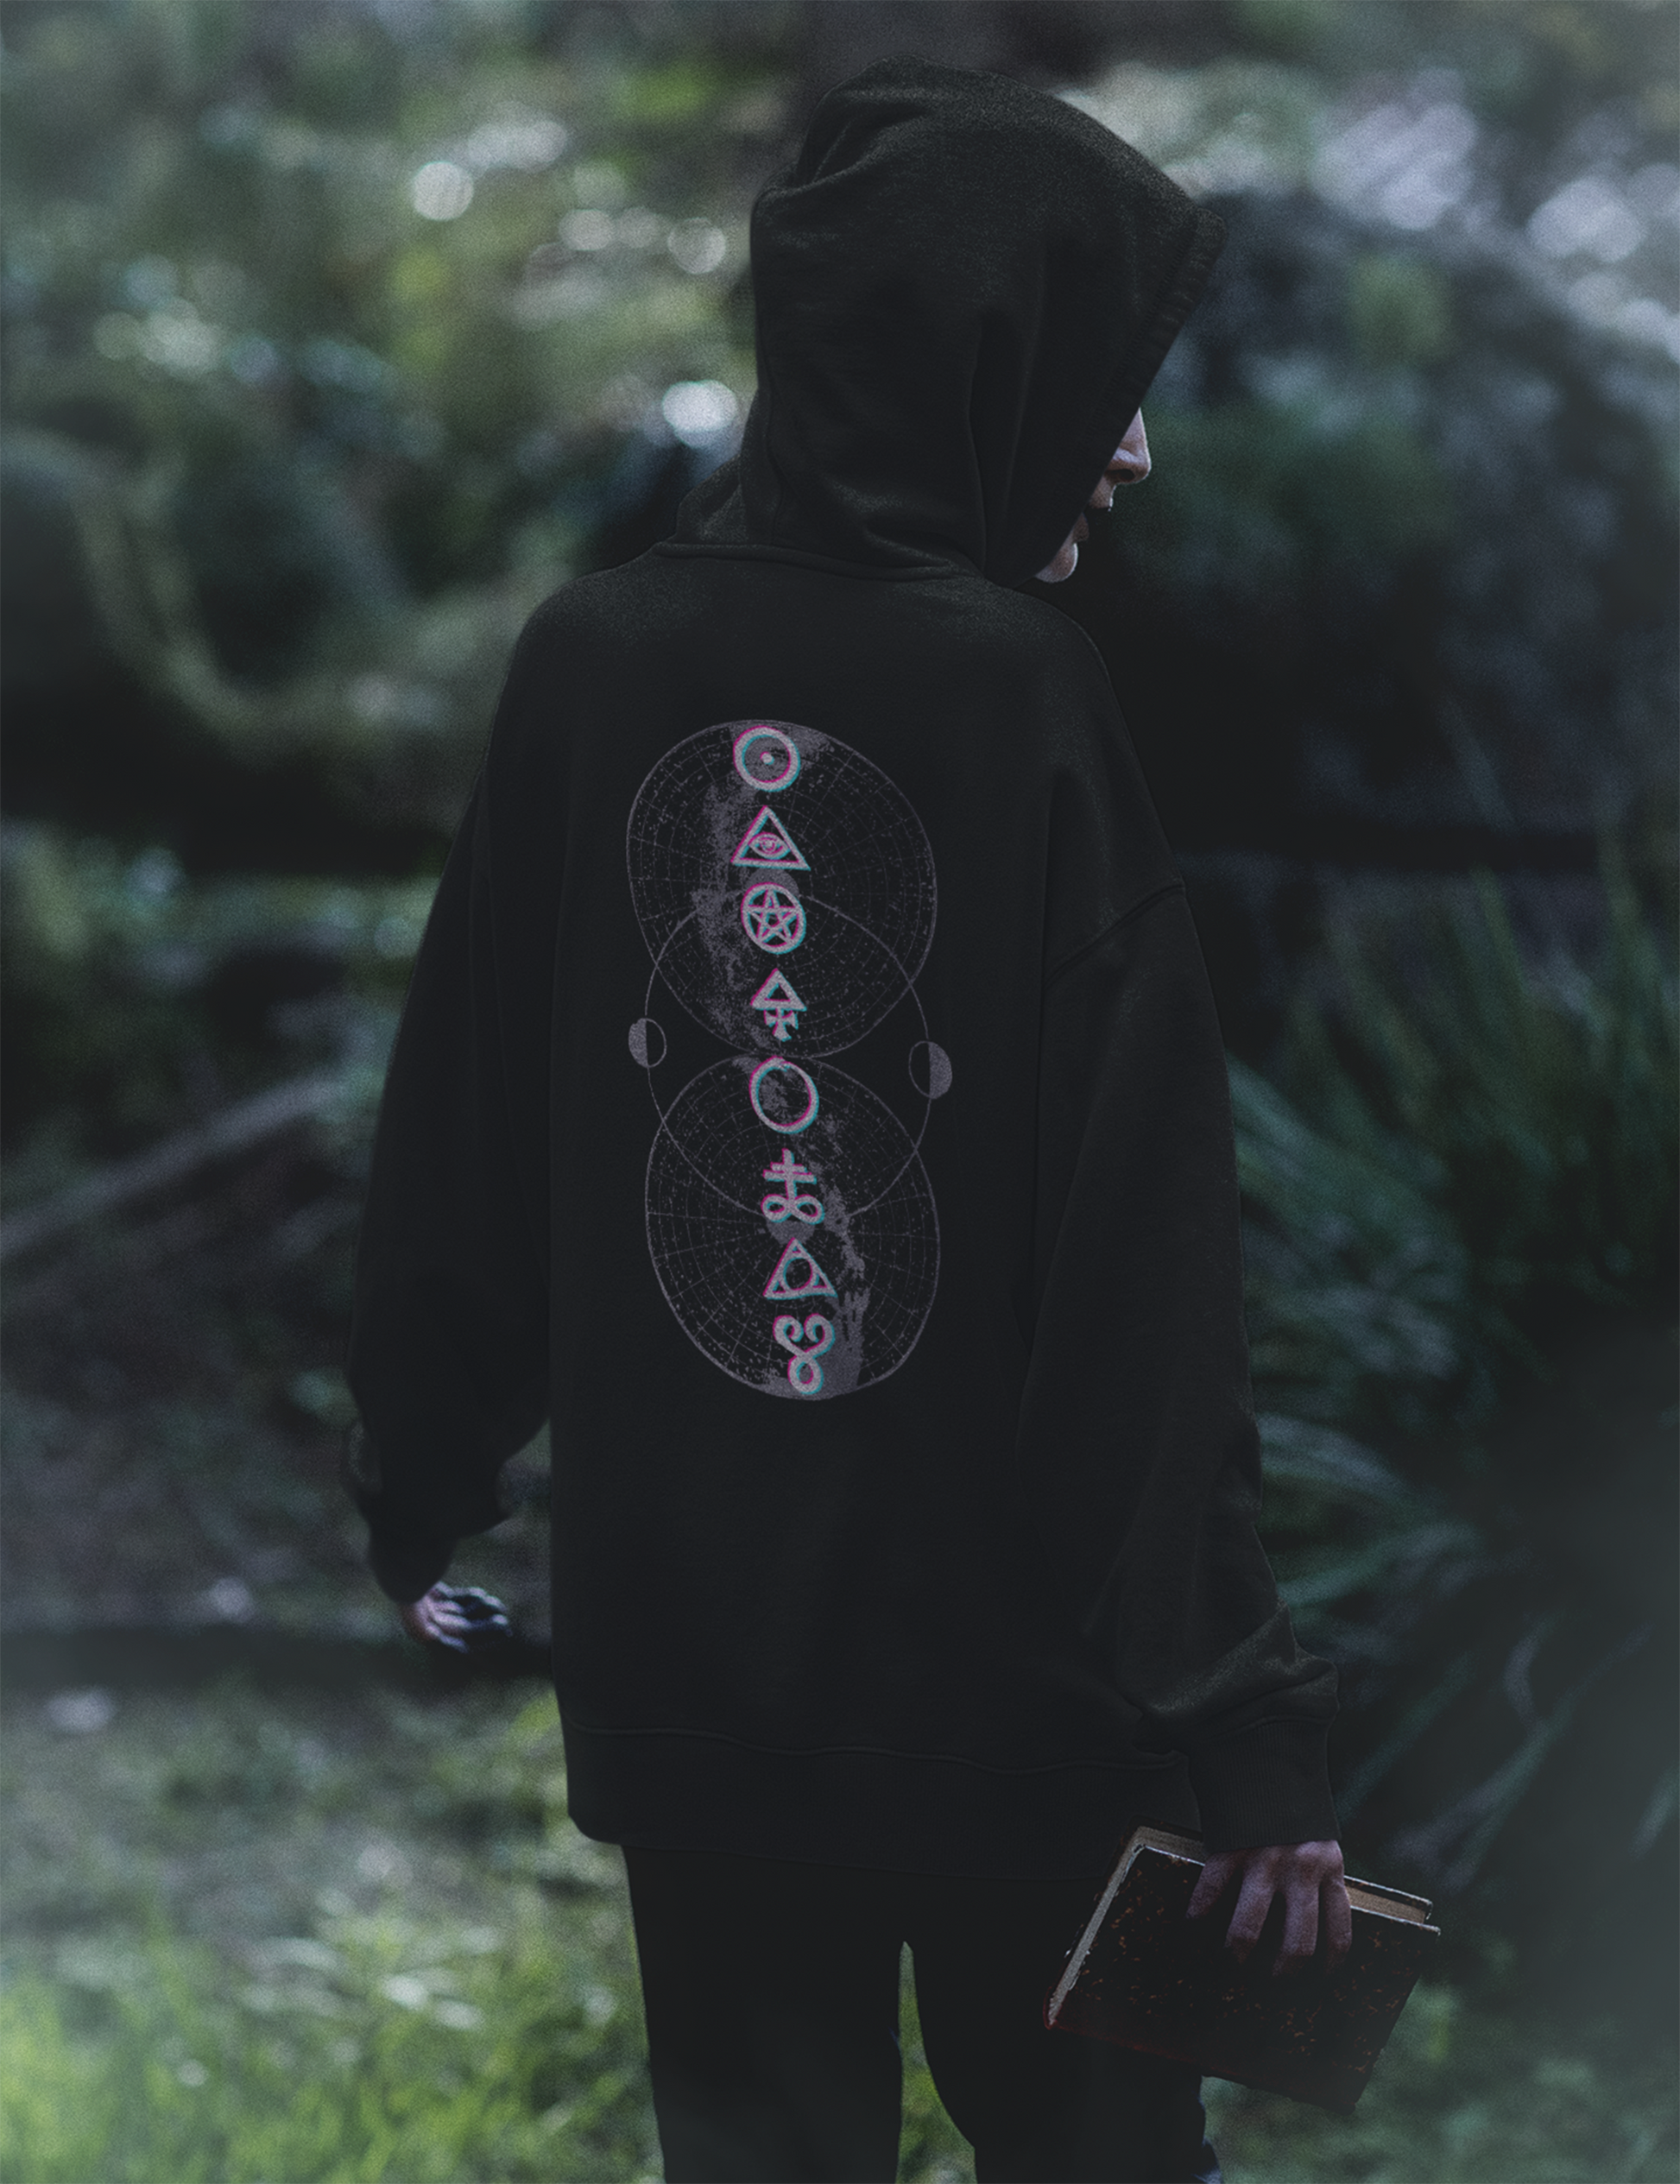 Goth Glitch Occult Symbols Plus Size Witchy Aesthetic Hoodie